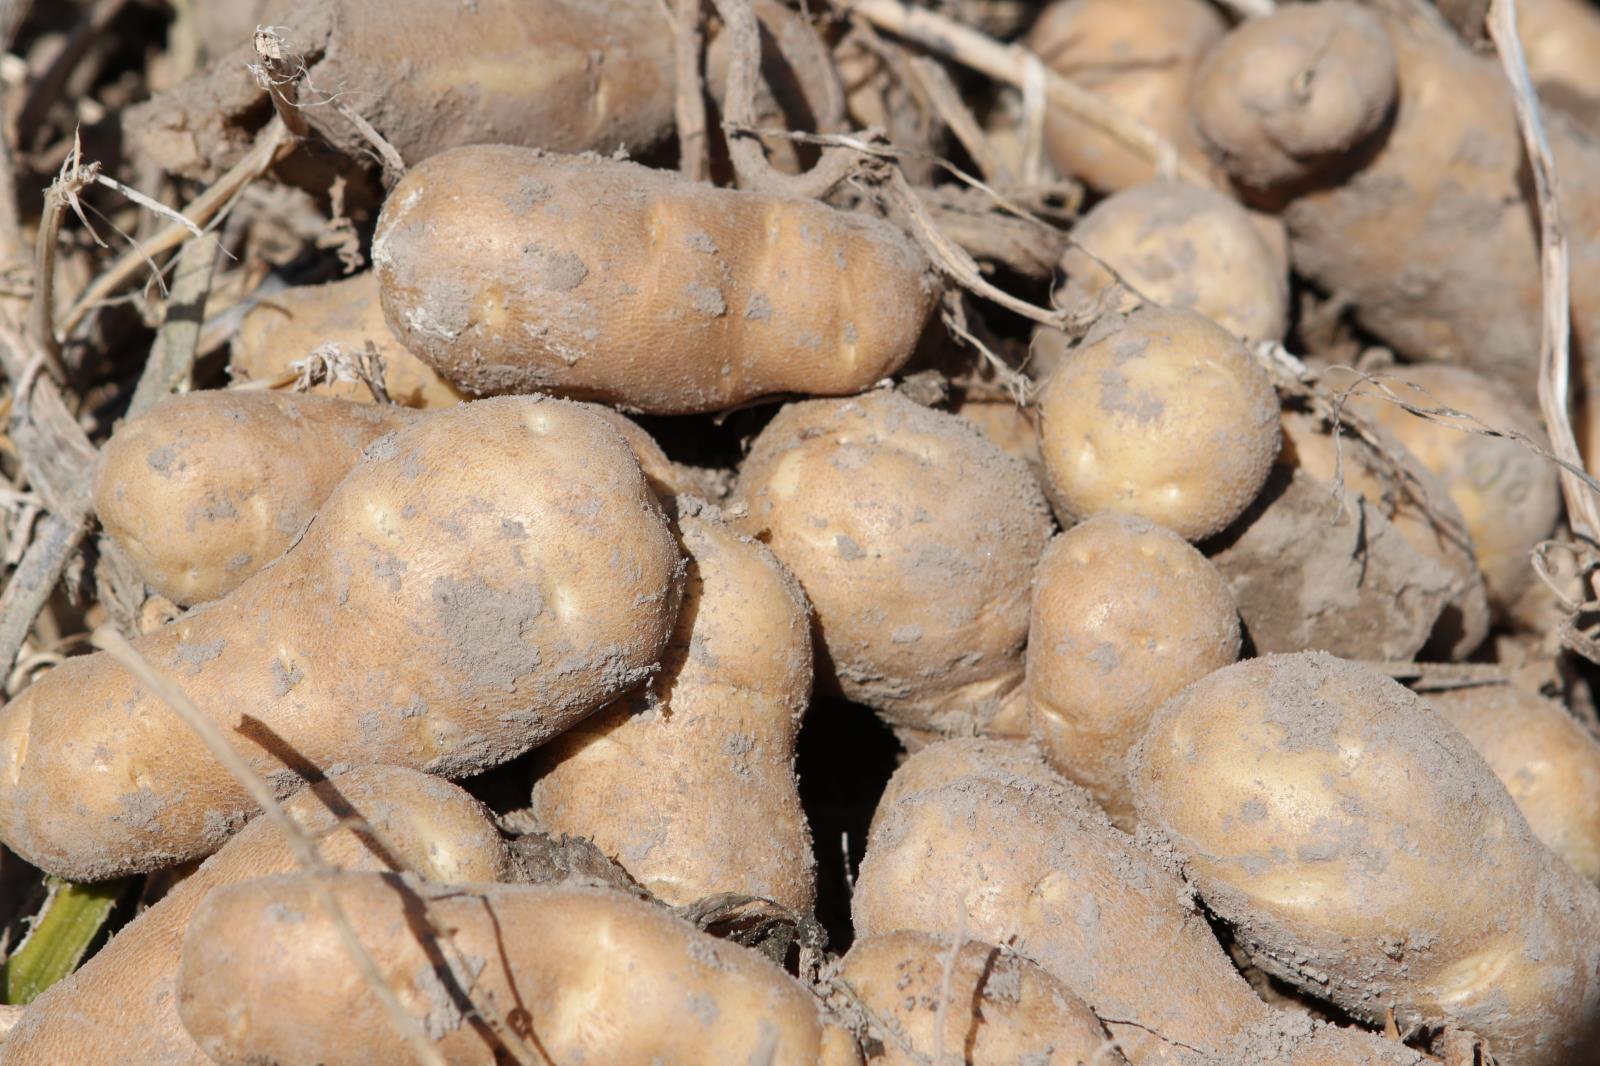 Consumer demand spurred by reaction to the coronavirus has led to higher retail potato prices and even some empty spud displays in grocery stores in the potato state. 